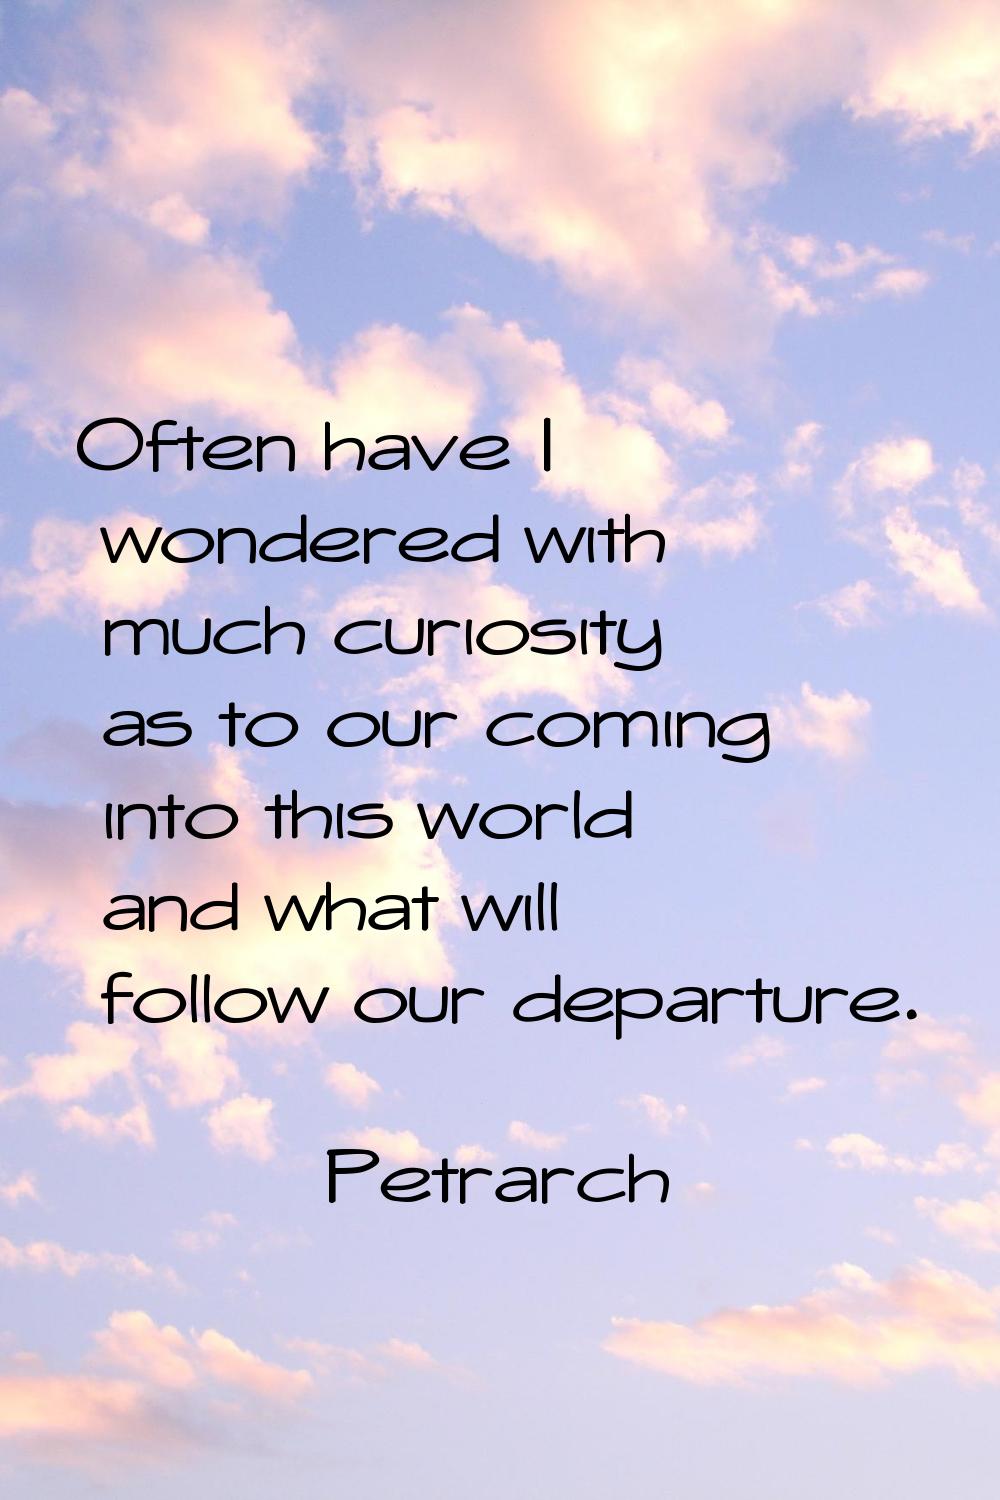 Often have I wondered with much curiosity as to our coming into this world and what will follow our